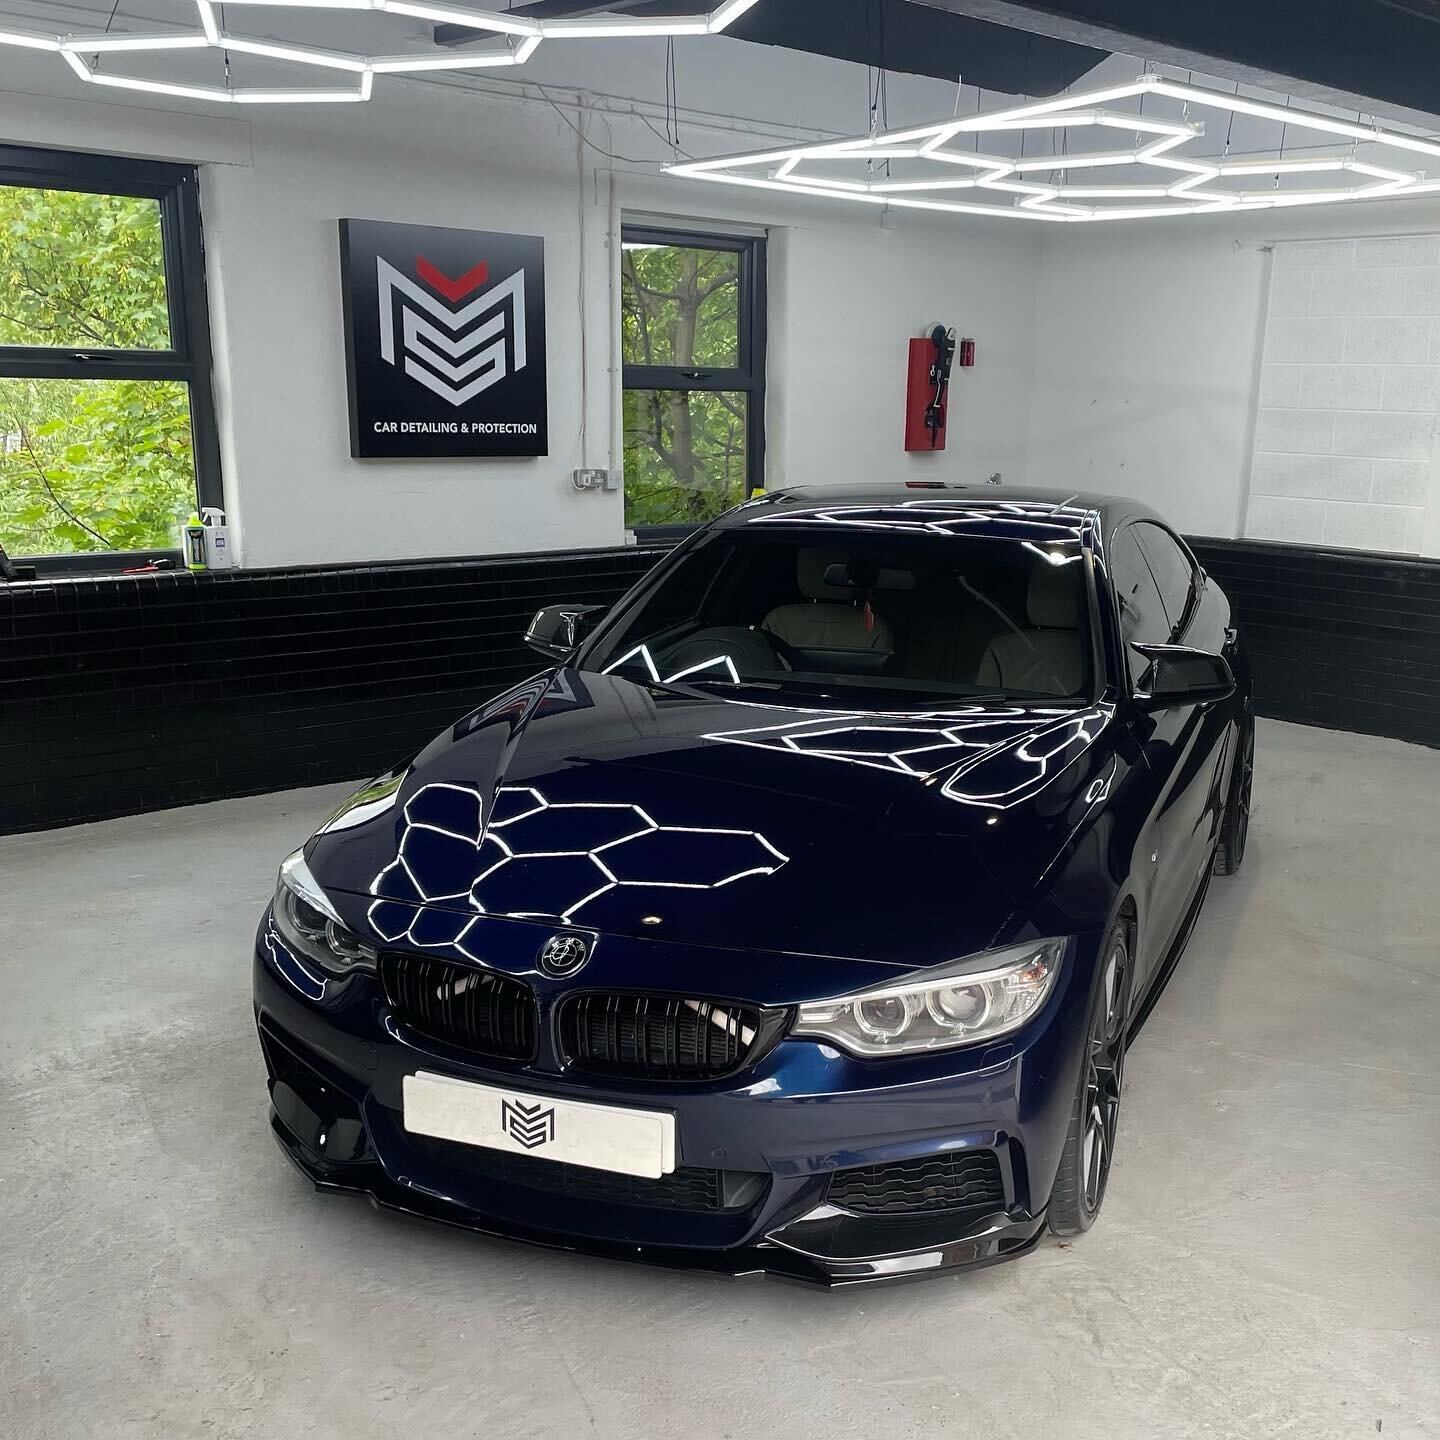 ✨MSDETAILINGUK✨
BMW 430D in for our correctional detail service. 
* Full decontamination 
* Swirl removal 
* Scratch removal 
* Restored paintwork 
* + More 
___________
➡️SWIPE➡️
__________________
Facebook- msdetailinguk
Snapchat- msdetailinguk 
__